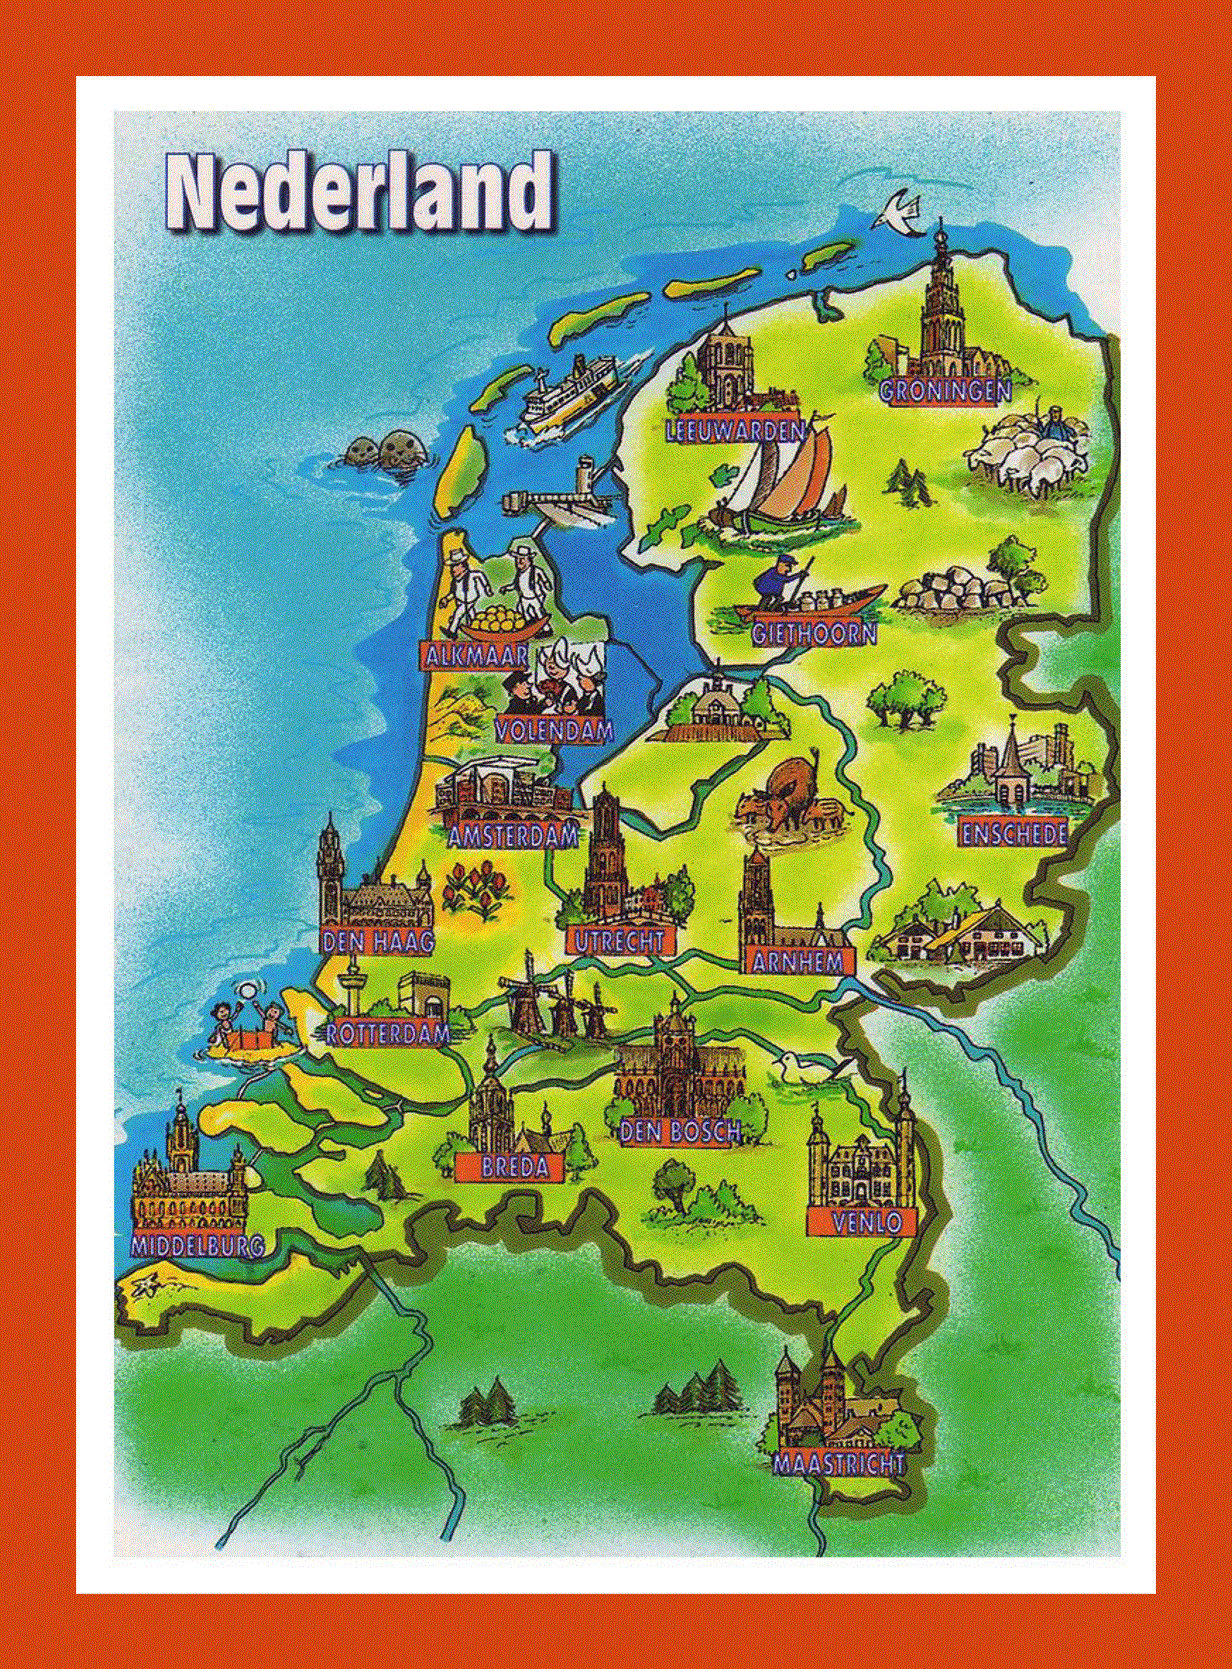 Tourist illustrated map of Netherlands